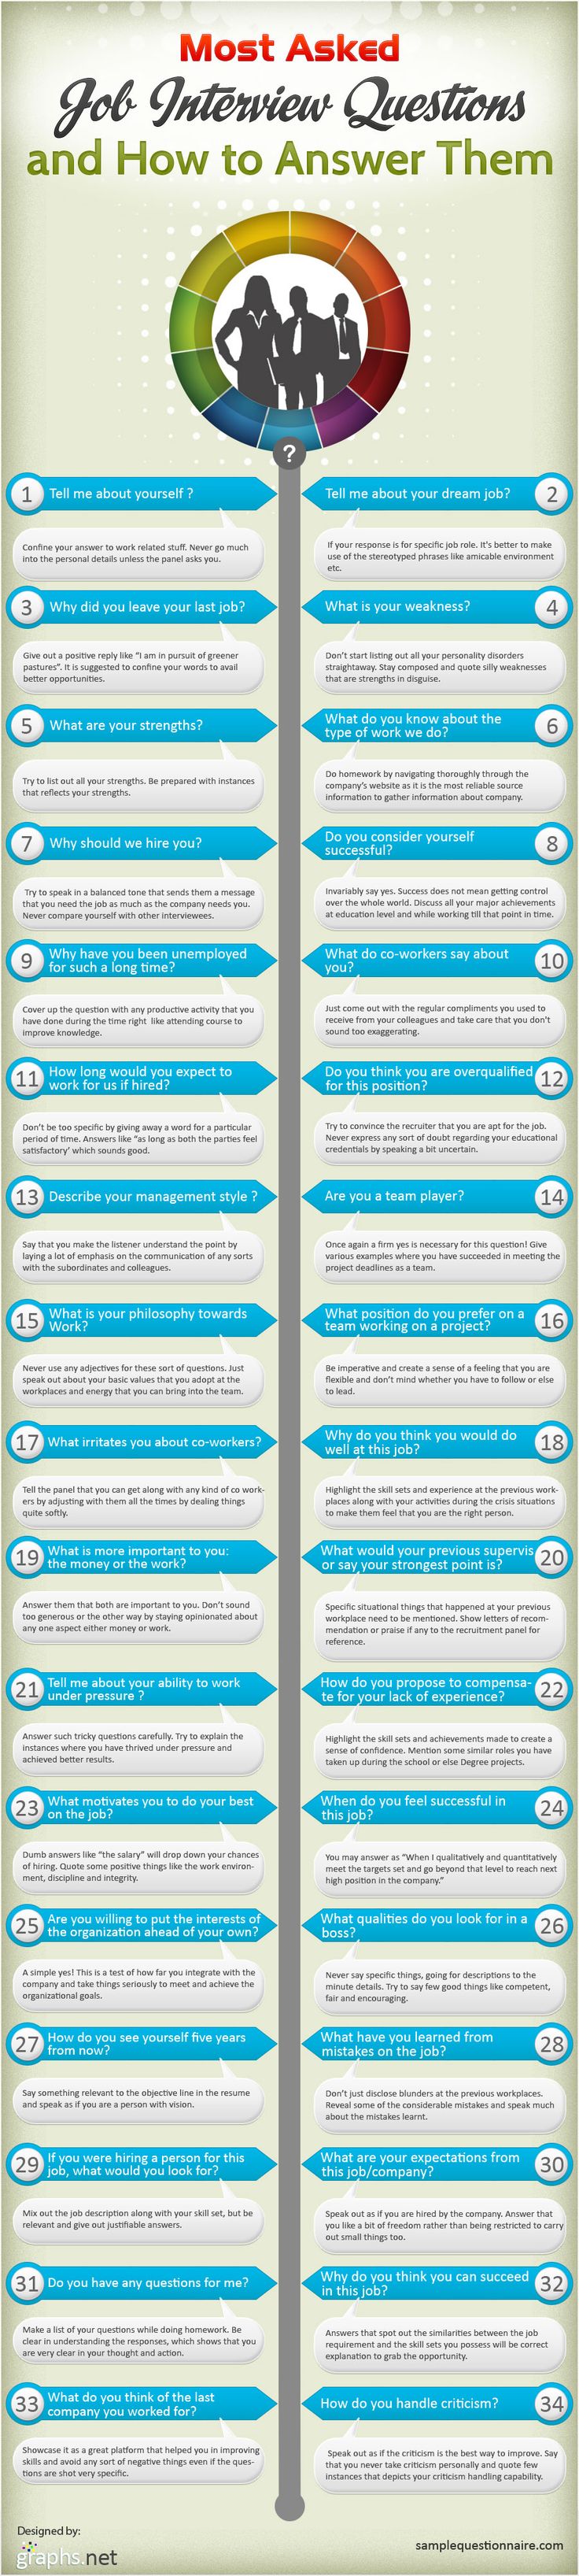 Infographic - Most Commonly Asked Interview Questions